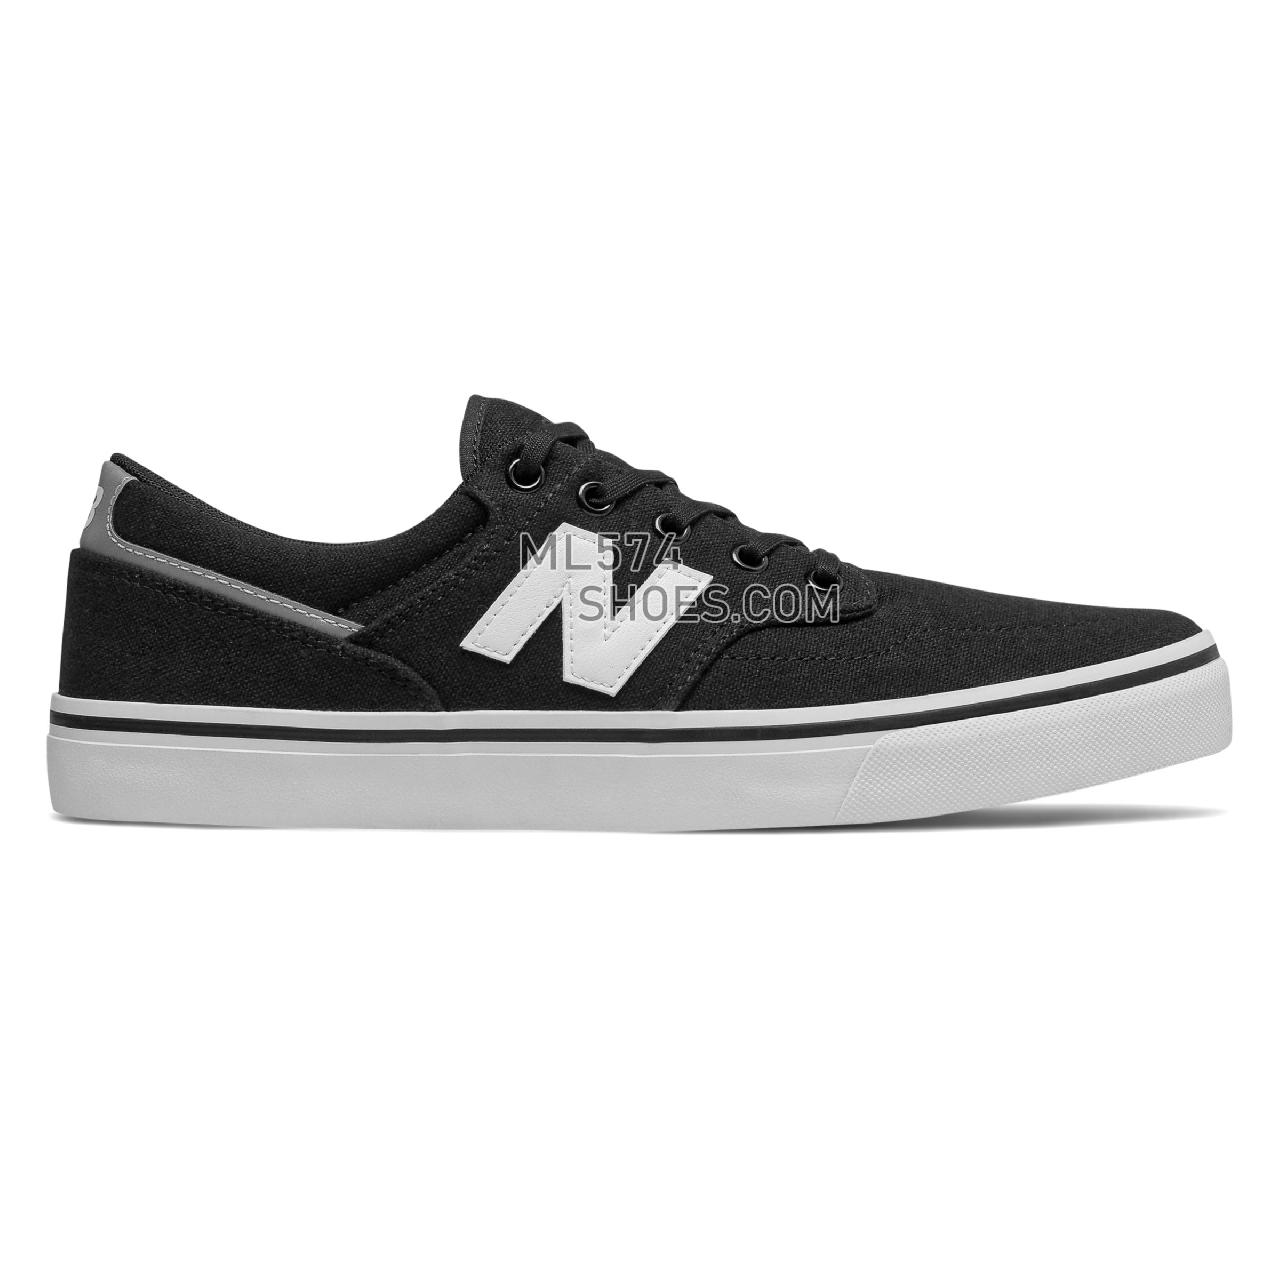 New Balance All Coasts 331 - Men's Court Classics - Black with White and Light Grey - AM331NBB